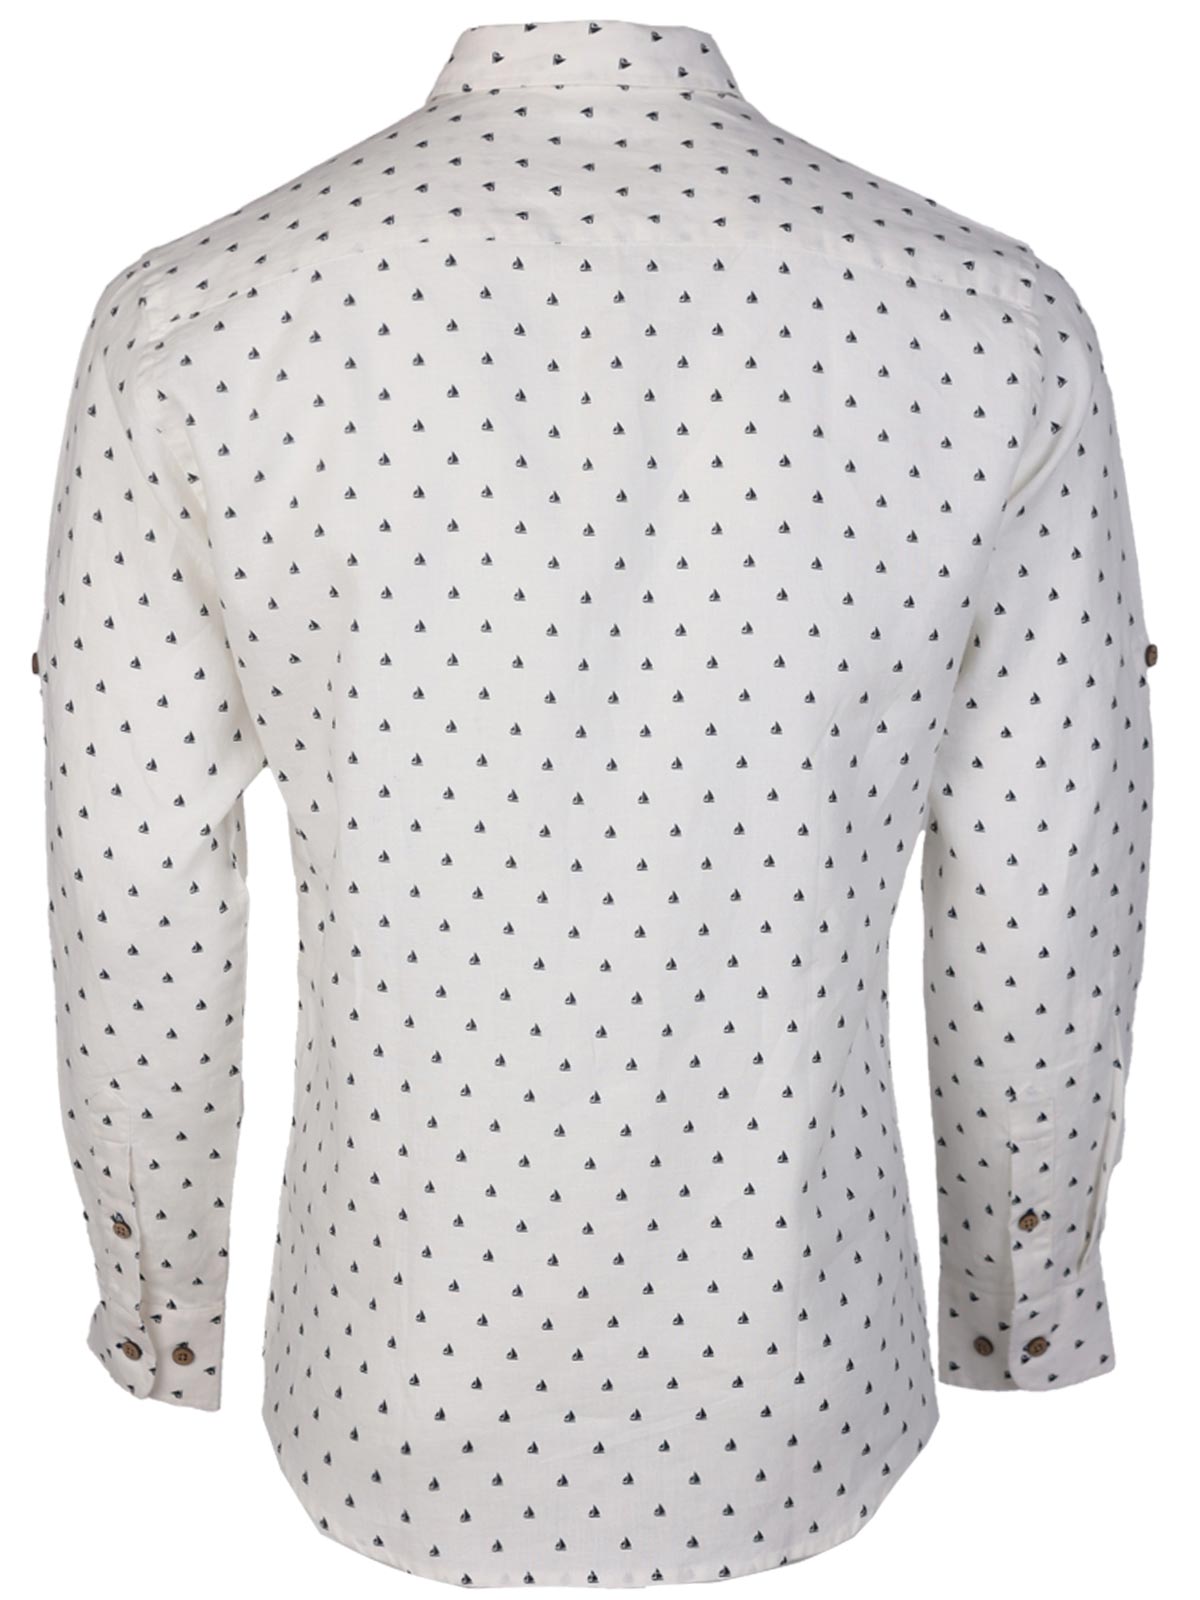 White shirt with ships - 21615 € 69.74 img2